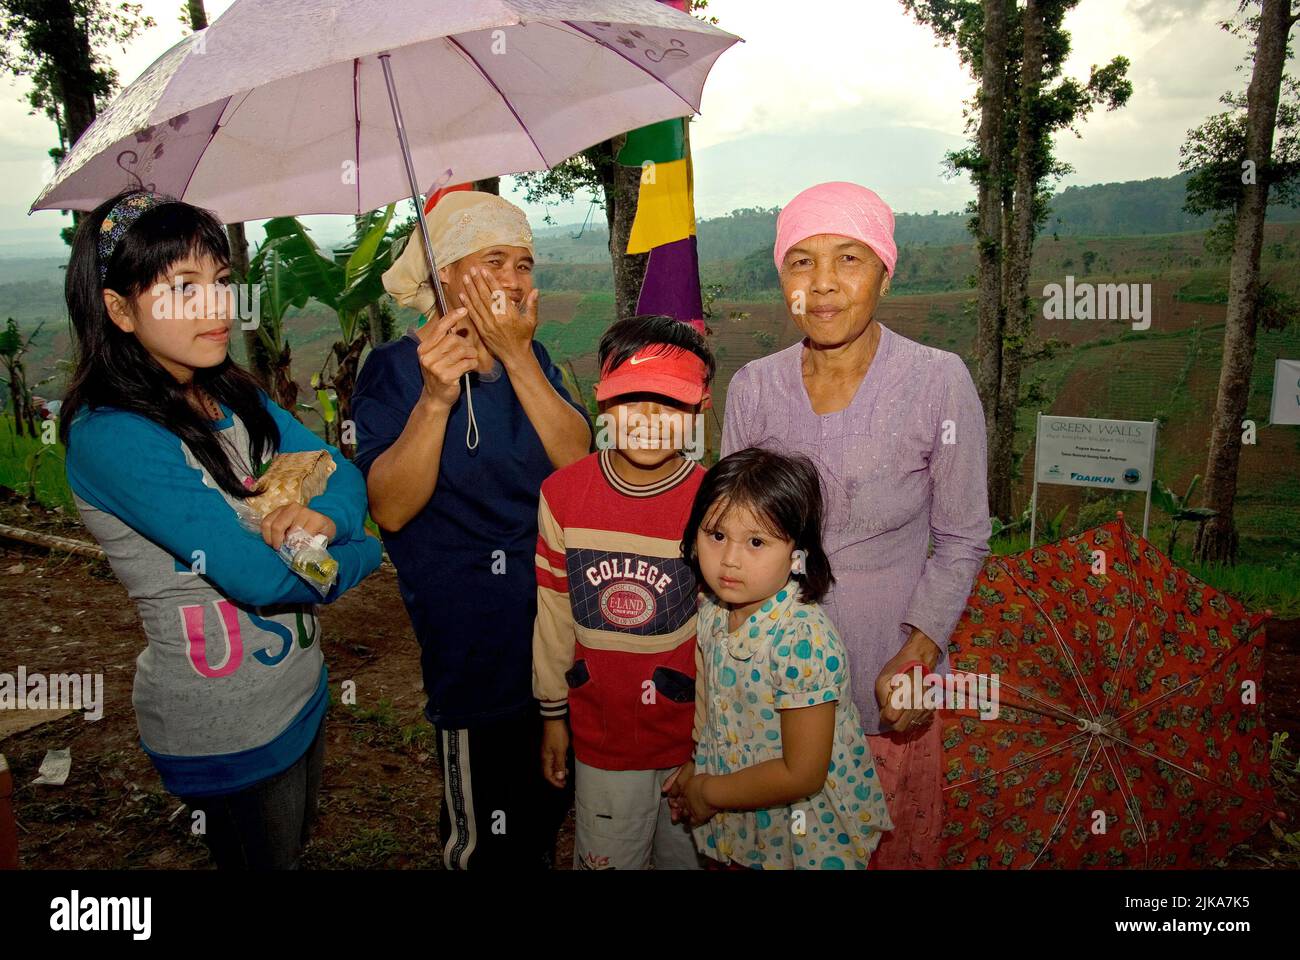 Group portrait of women farmers and children in Nagrak, a farming village located on the border of Gede Pangrango National Park in Cibadak, Sukabumi, West Java, Indonesia. Stock Photo